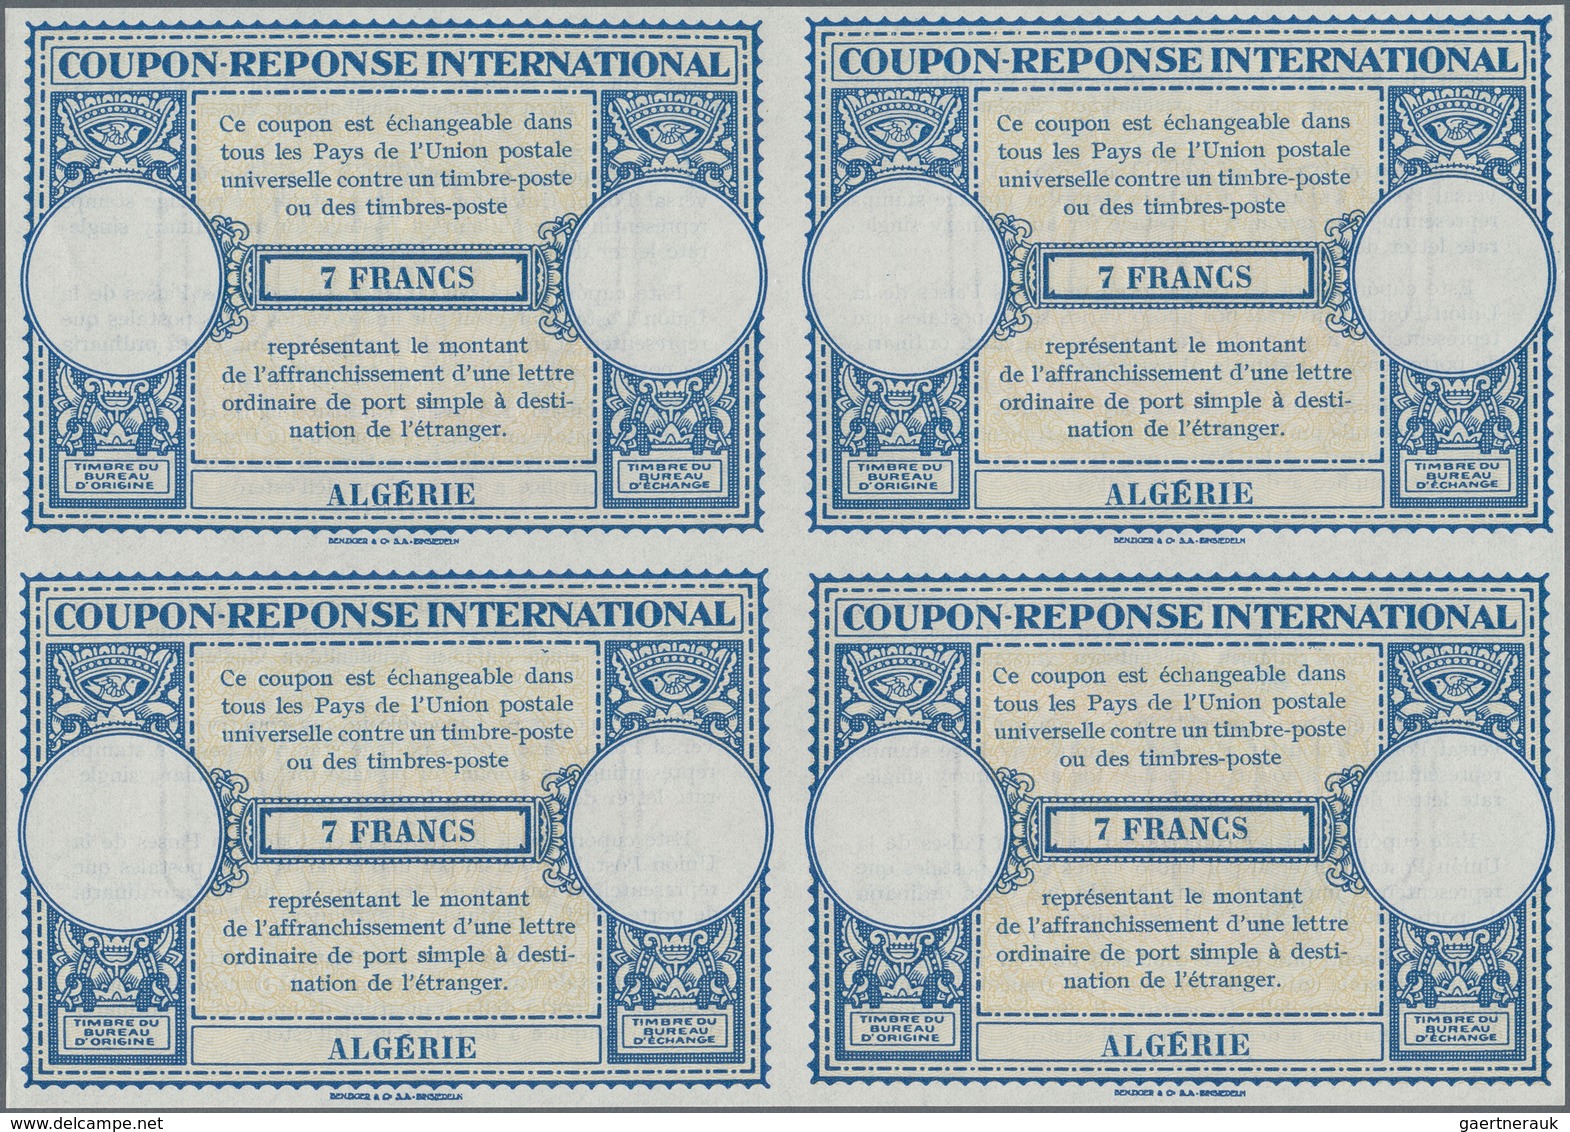 Algerien: 1940s (approx). International Reply Coupon 7 Francs (London Type) In An Unused Block Of 4. - Covers & Documents